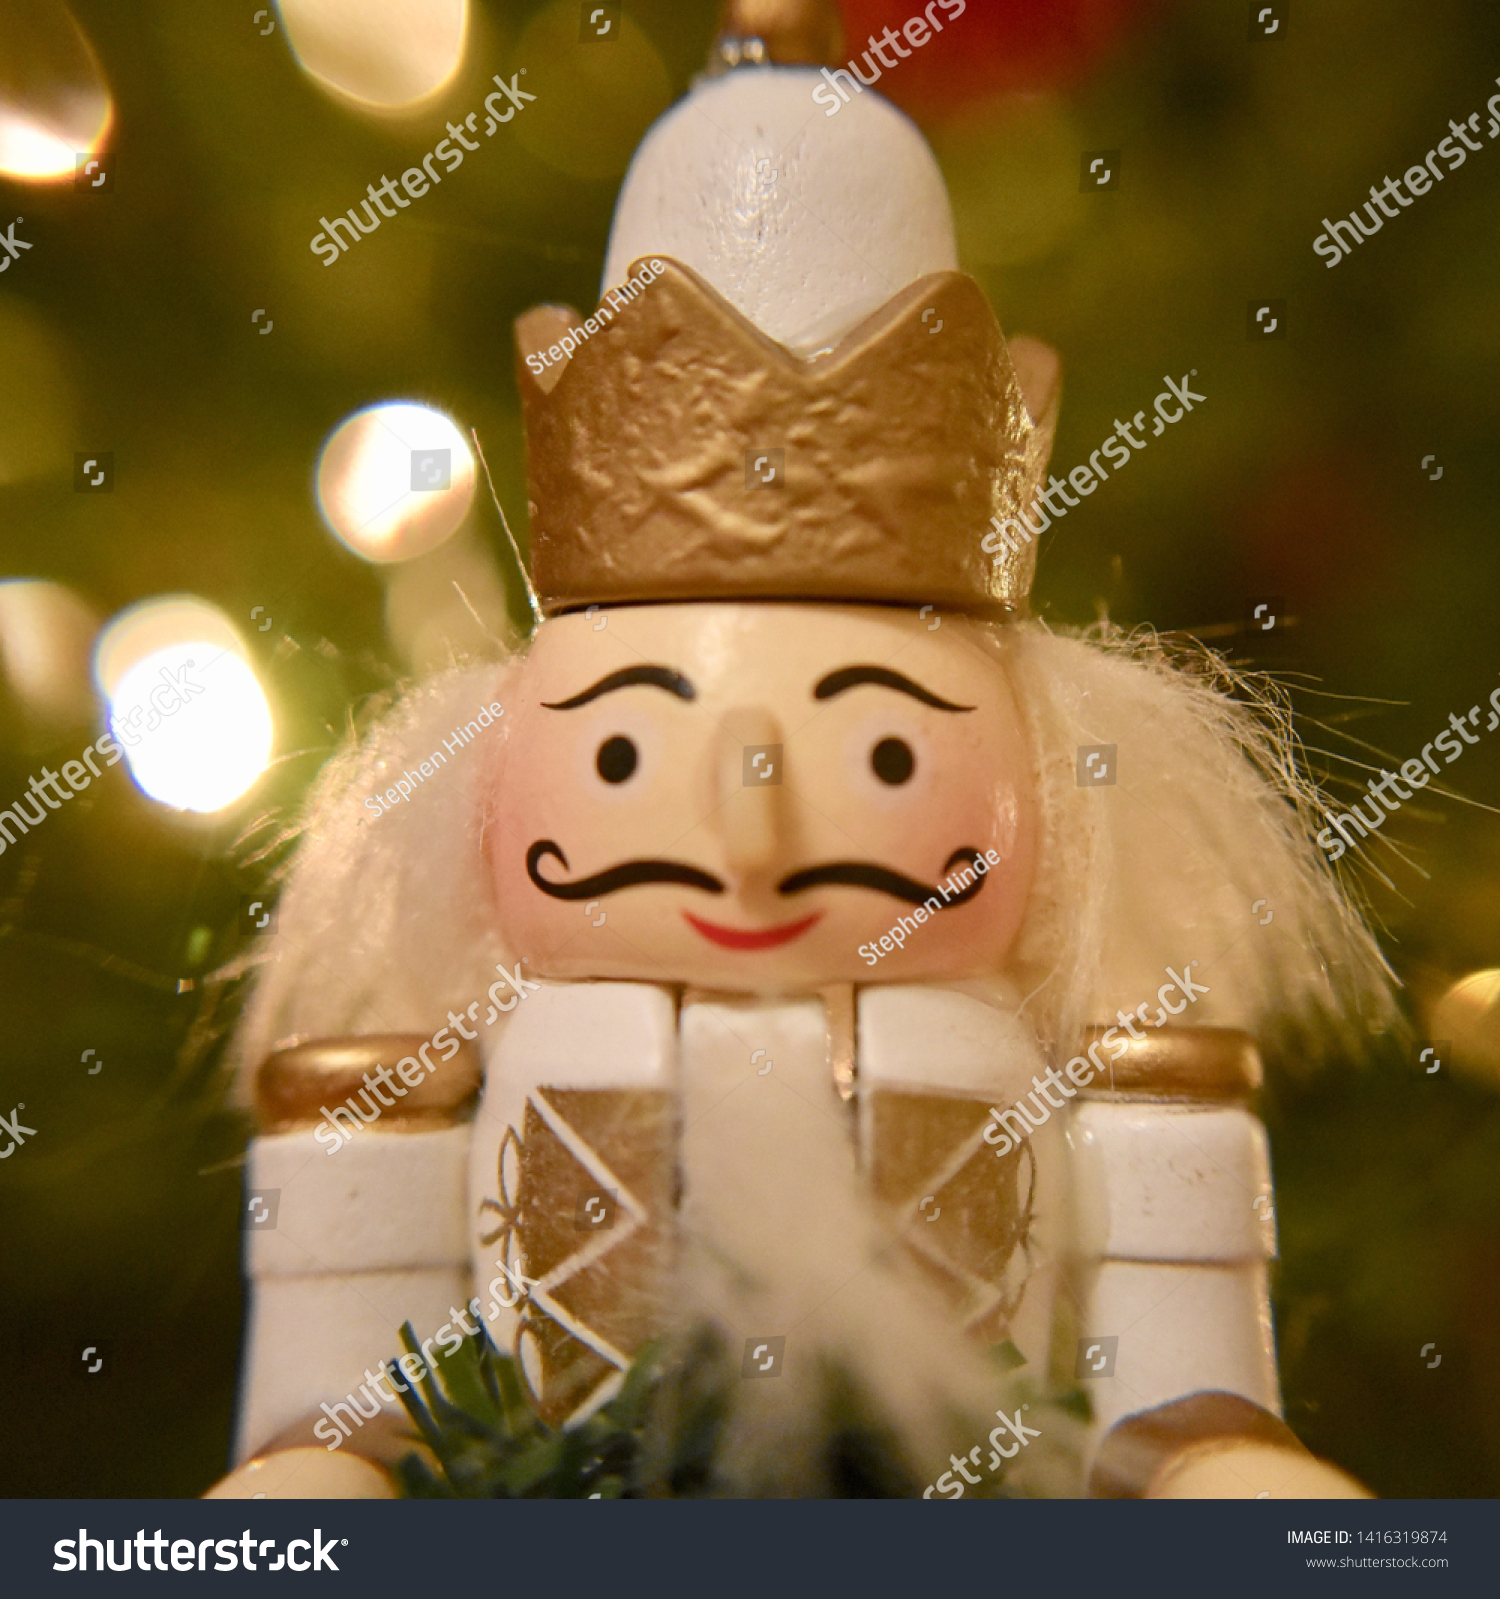 wooden toy soldiers christmas decorations